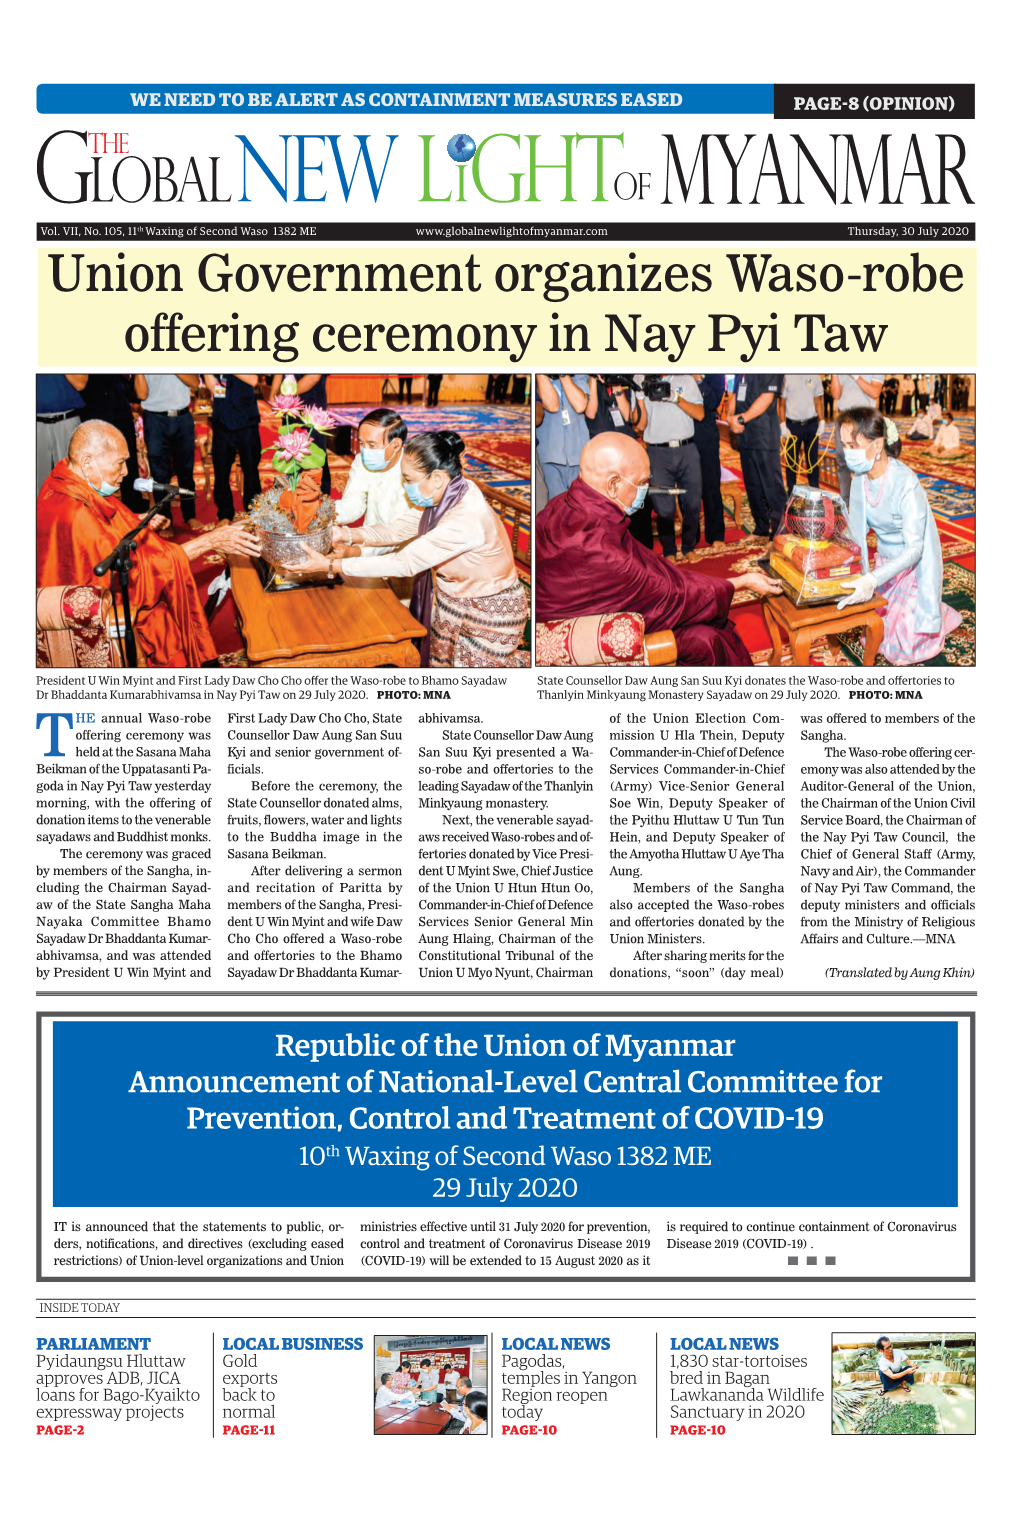 Union Government Organizes Waso-Robe Offering Ceremony in Nay Pyi Taw